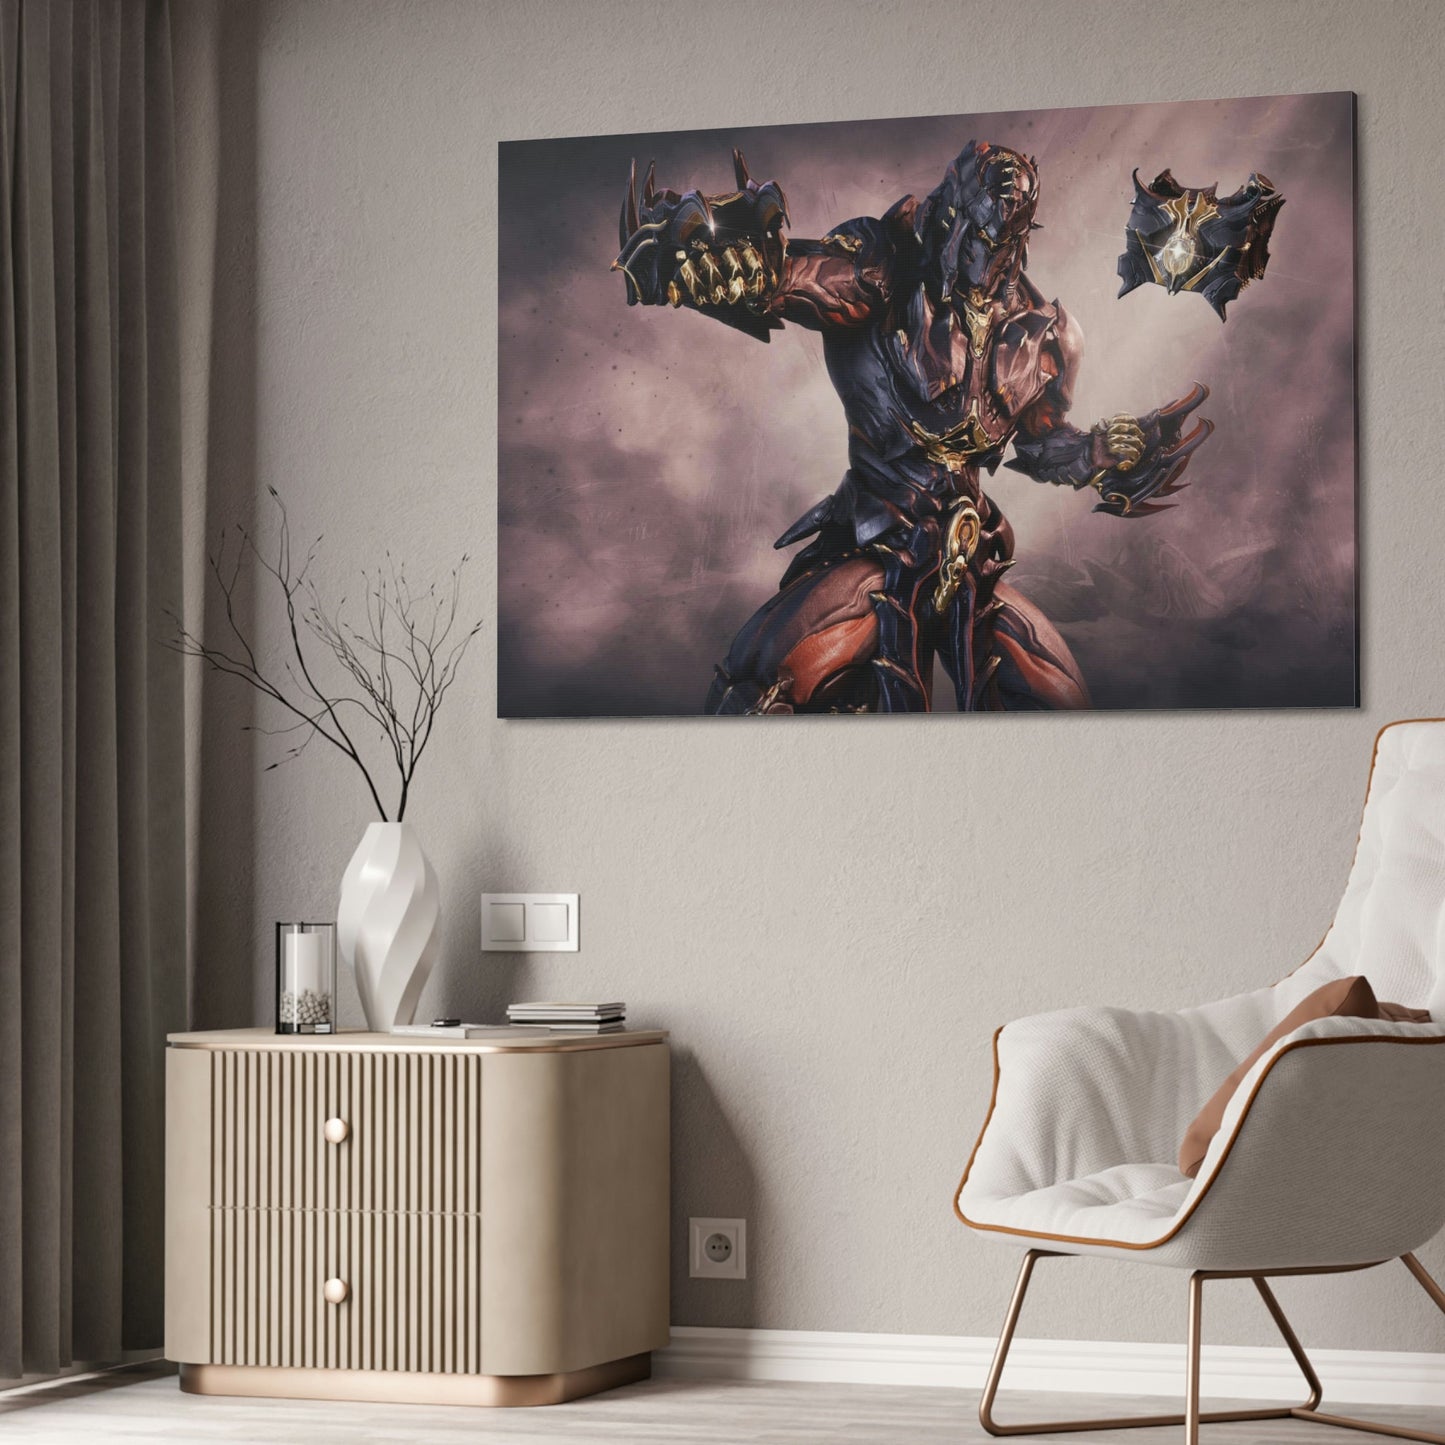 The Warframe Collection: Stunning Wall Art for Gamers and Art Lovers